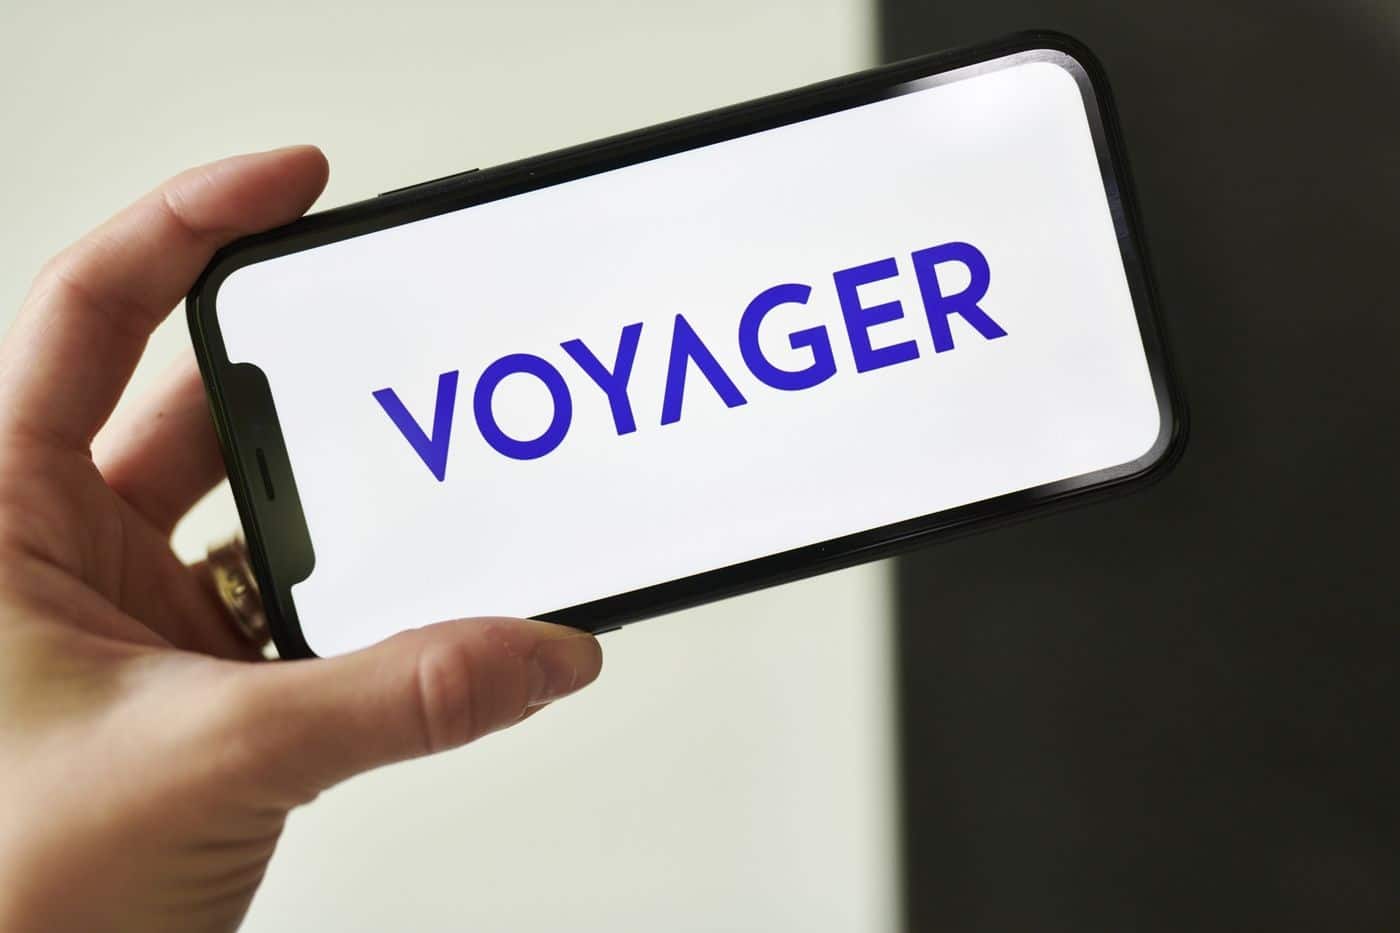 Why Voyager VGX token pumped its price after #PumpVGXJuly18 hash tag?